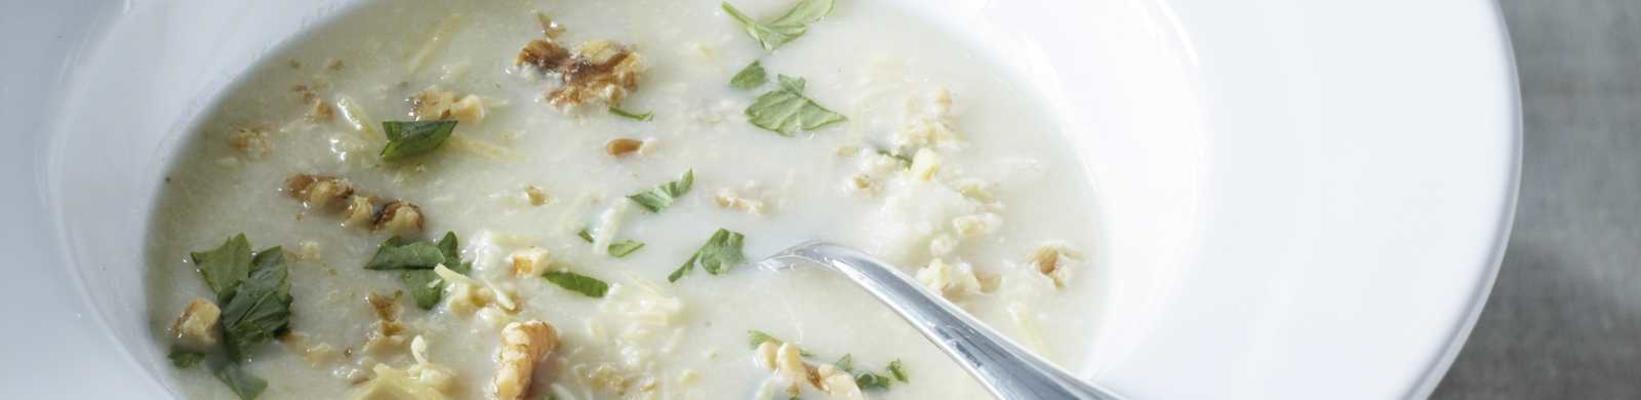 celeriac soup with cheese and nuts